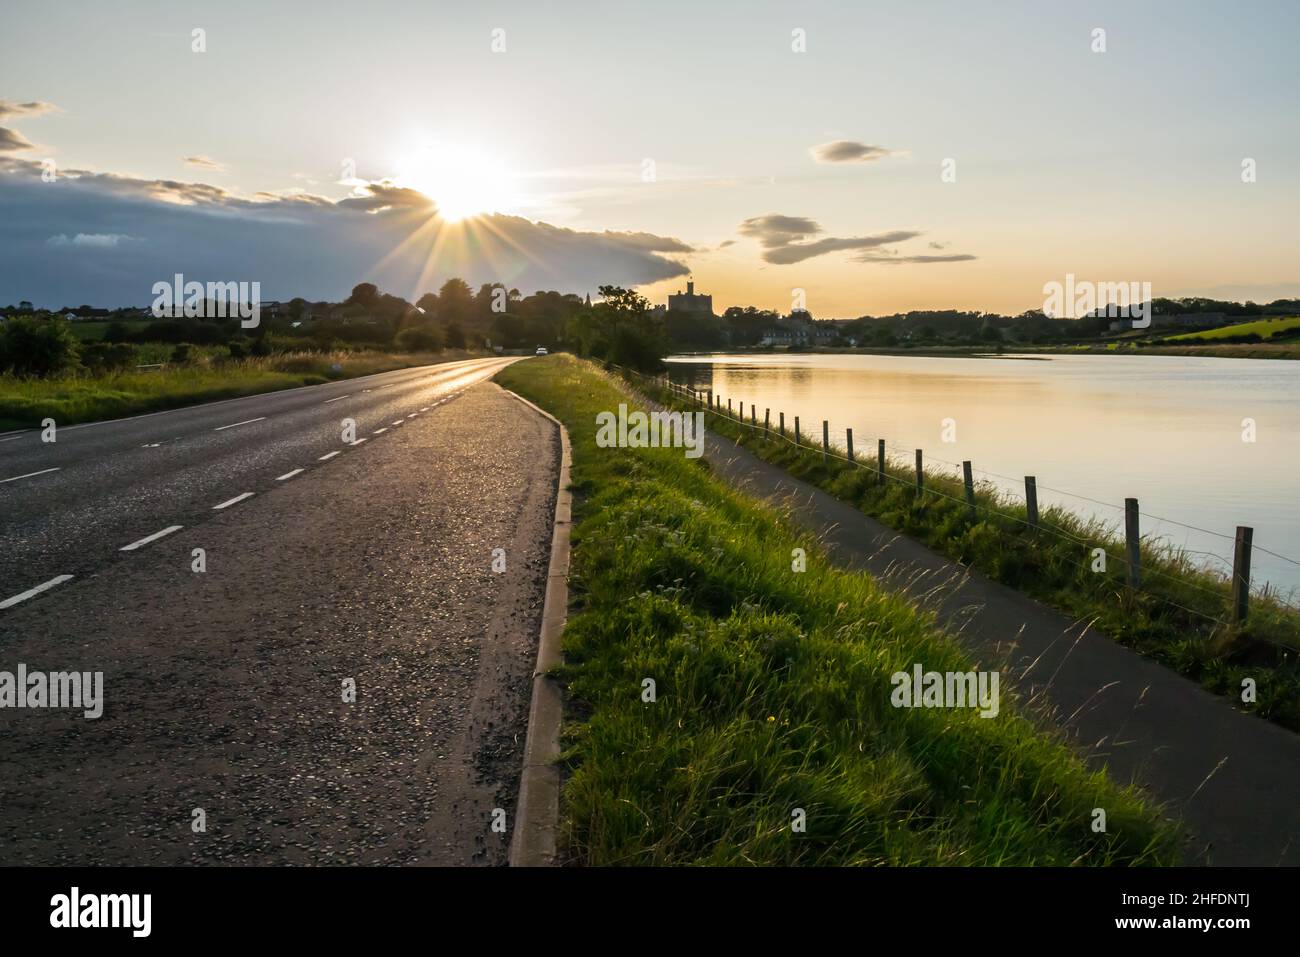 The Road Ahead - A Sunset Photograph of the Road Towards Warkworth from Amble, Northumberland Stock Photo